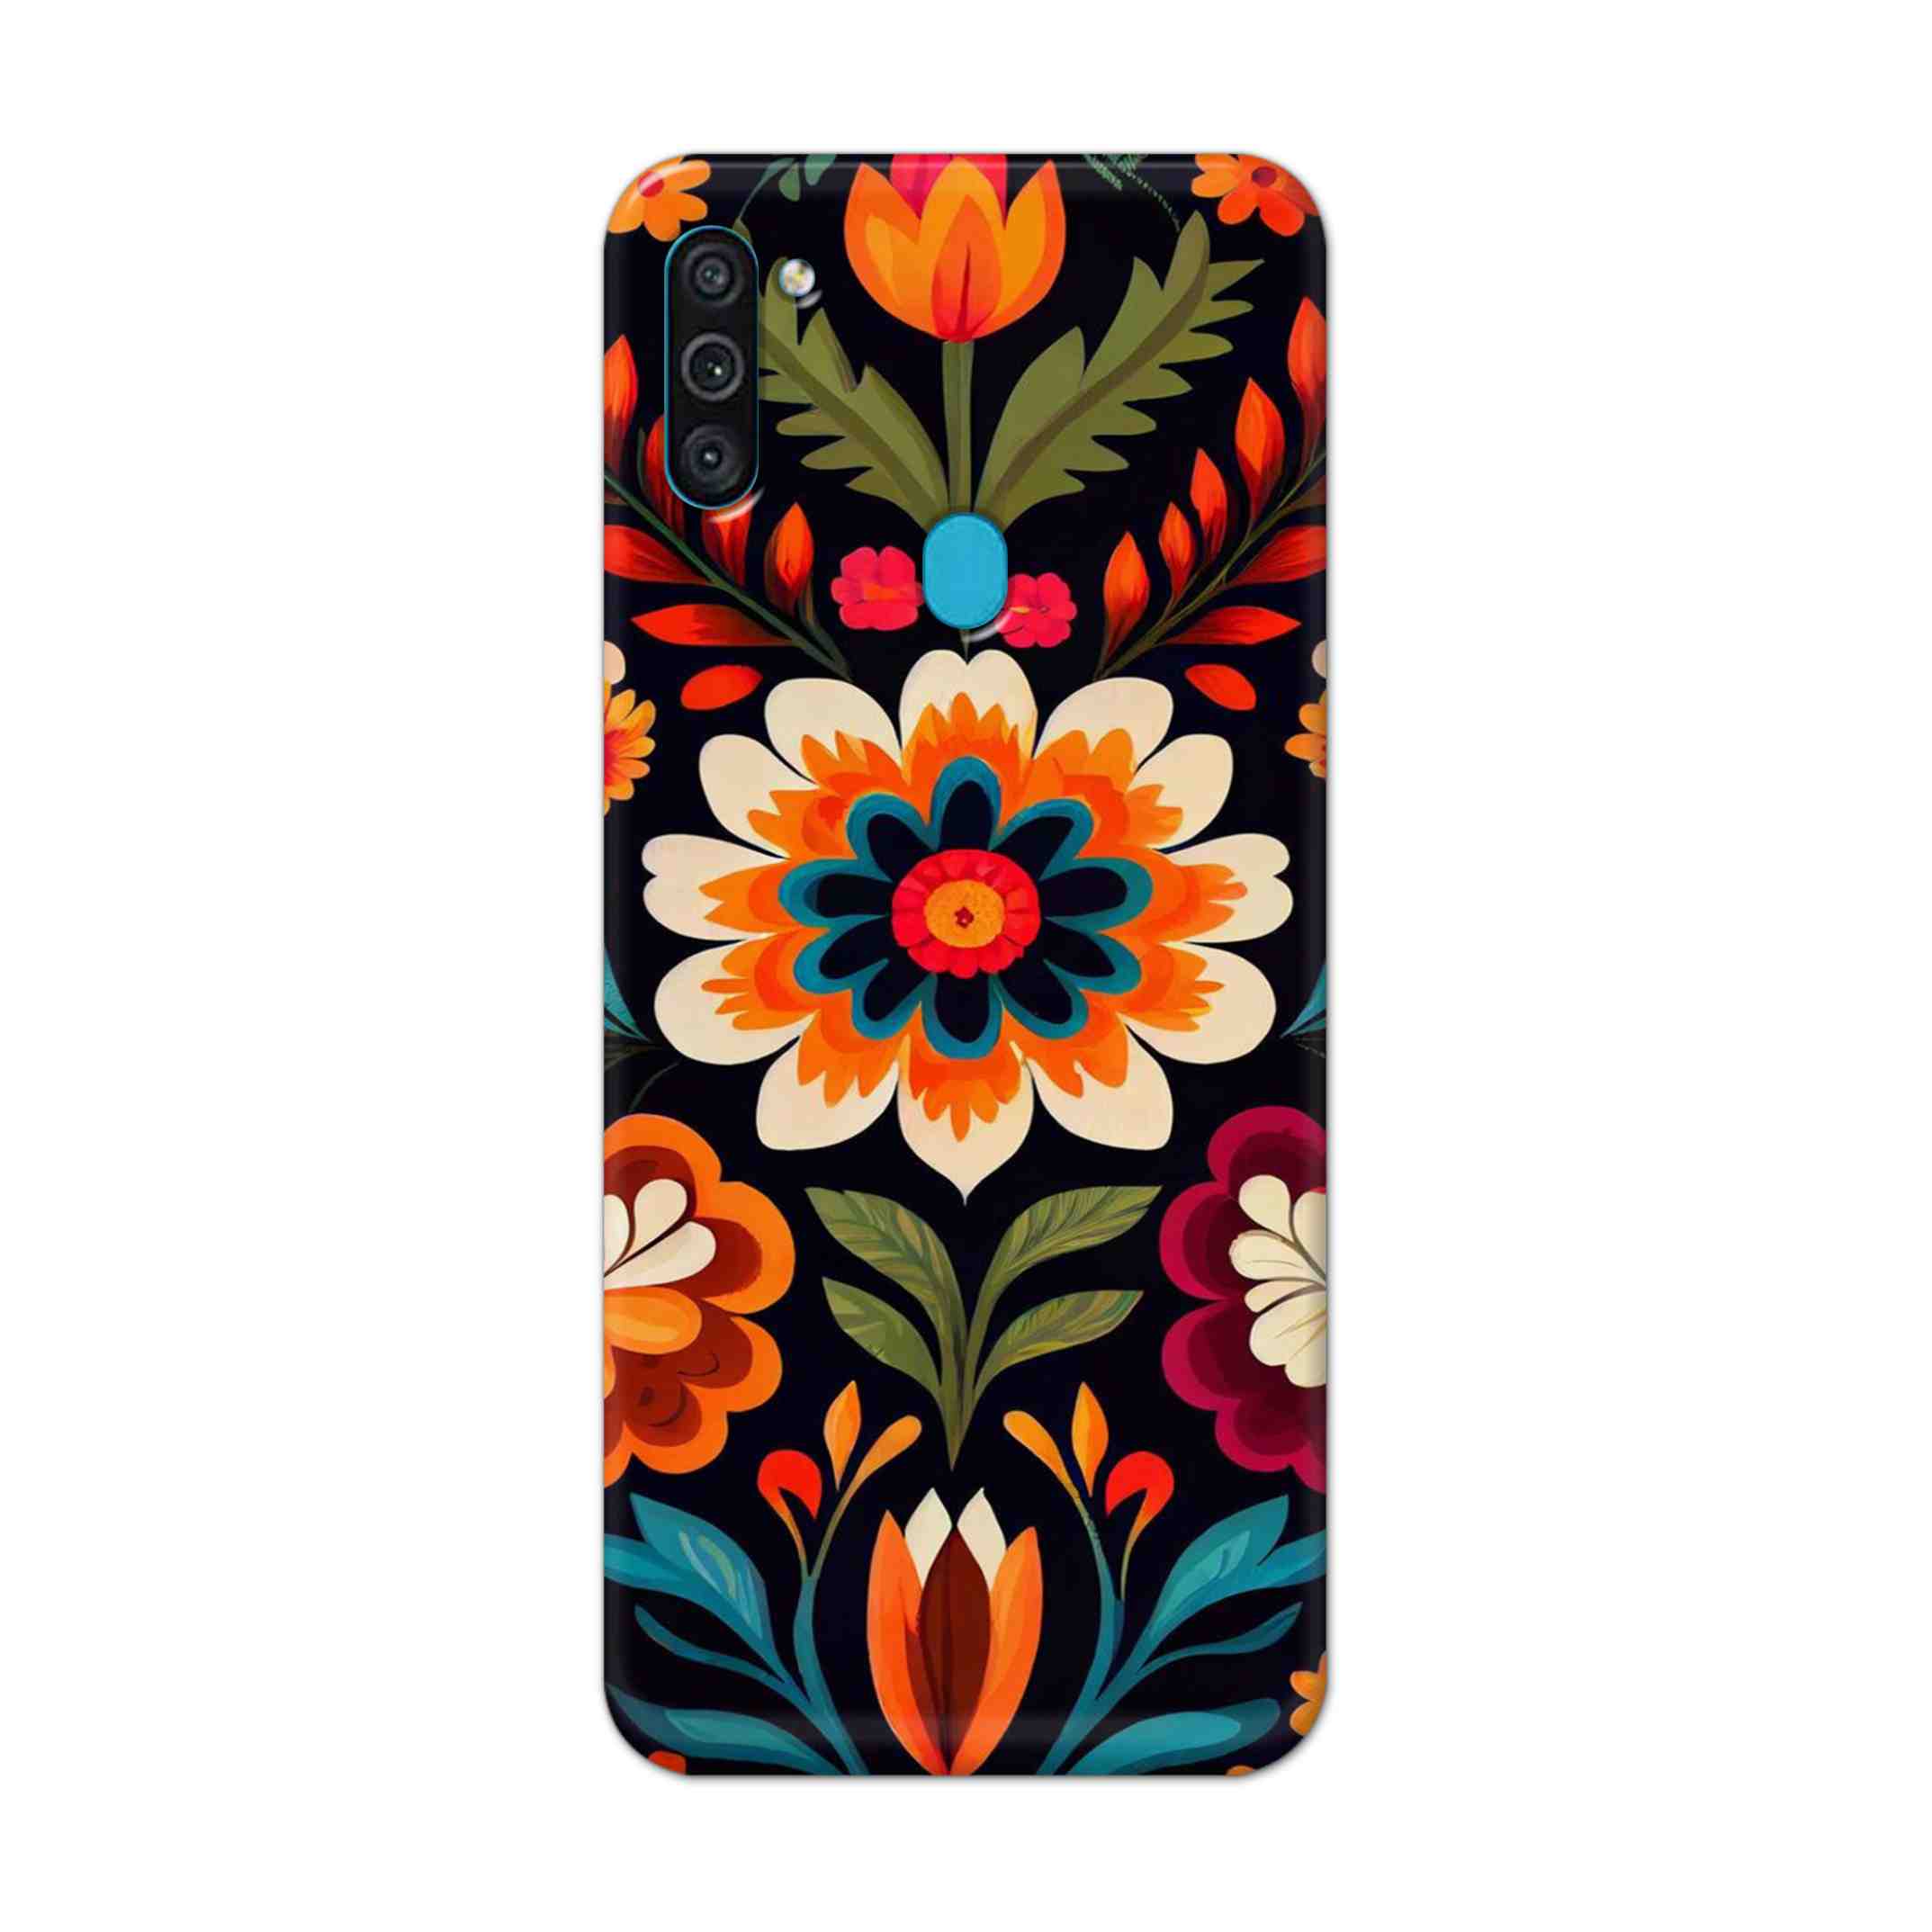 Buy Flower Hard Back Mobile Phone Case Cover For Samsung Galaxy M11 Online